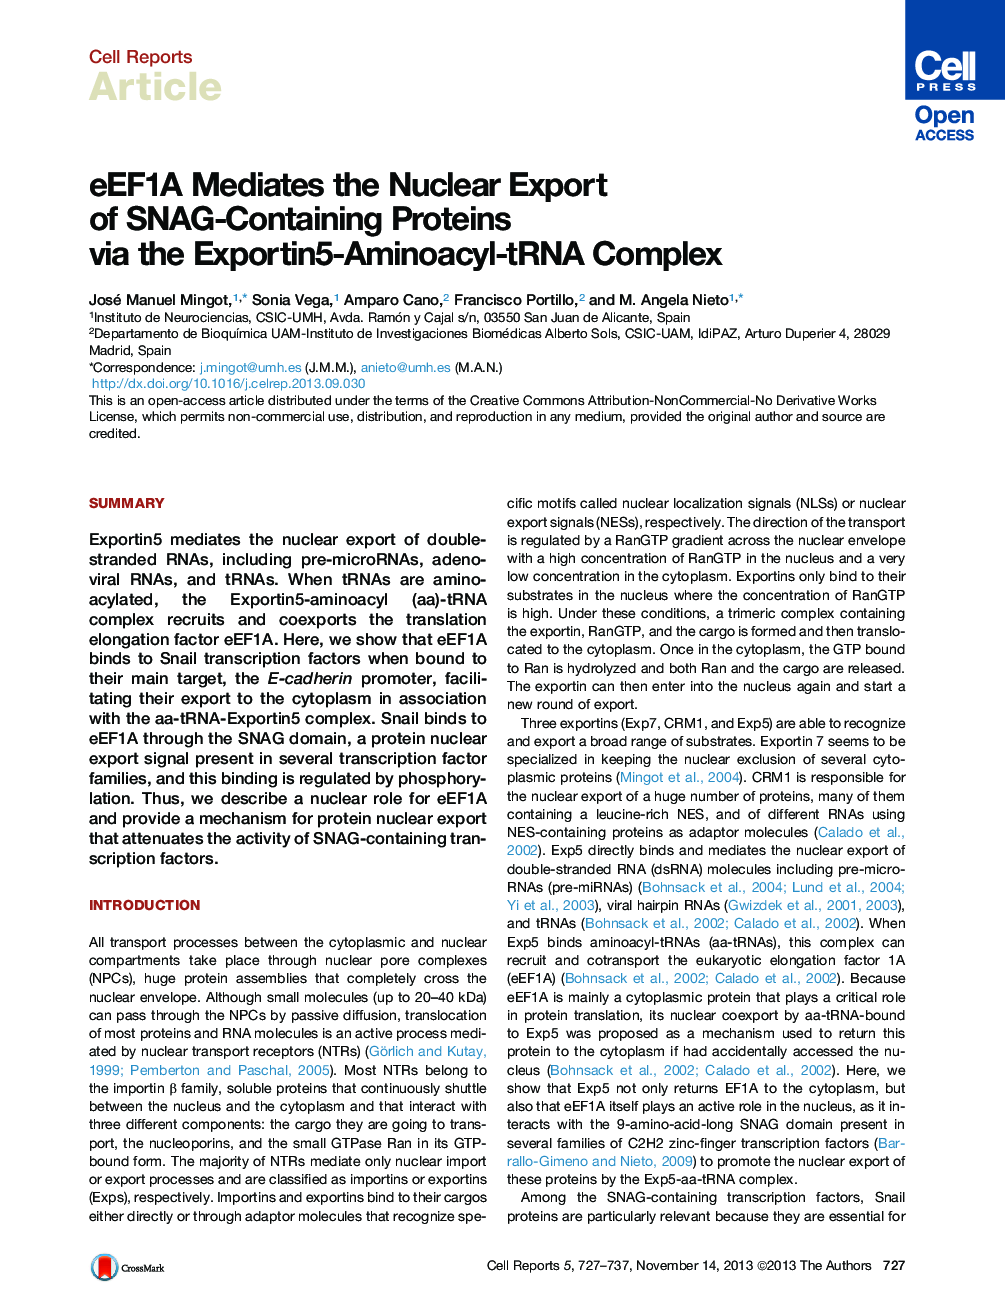 eEF1A Mediates the Nuclear Export of SNAG-Containing Proteins via the Exportin5-Aminoacyl-tRNA Complex 